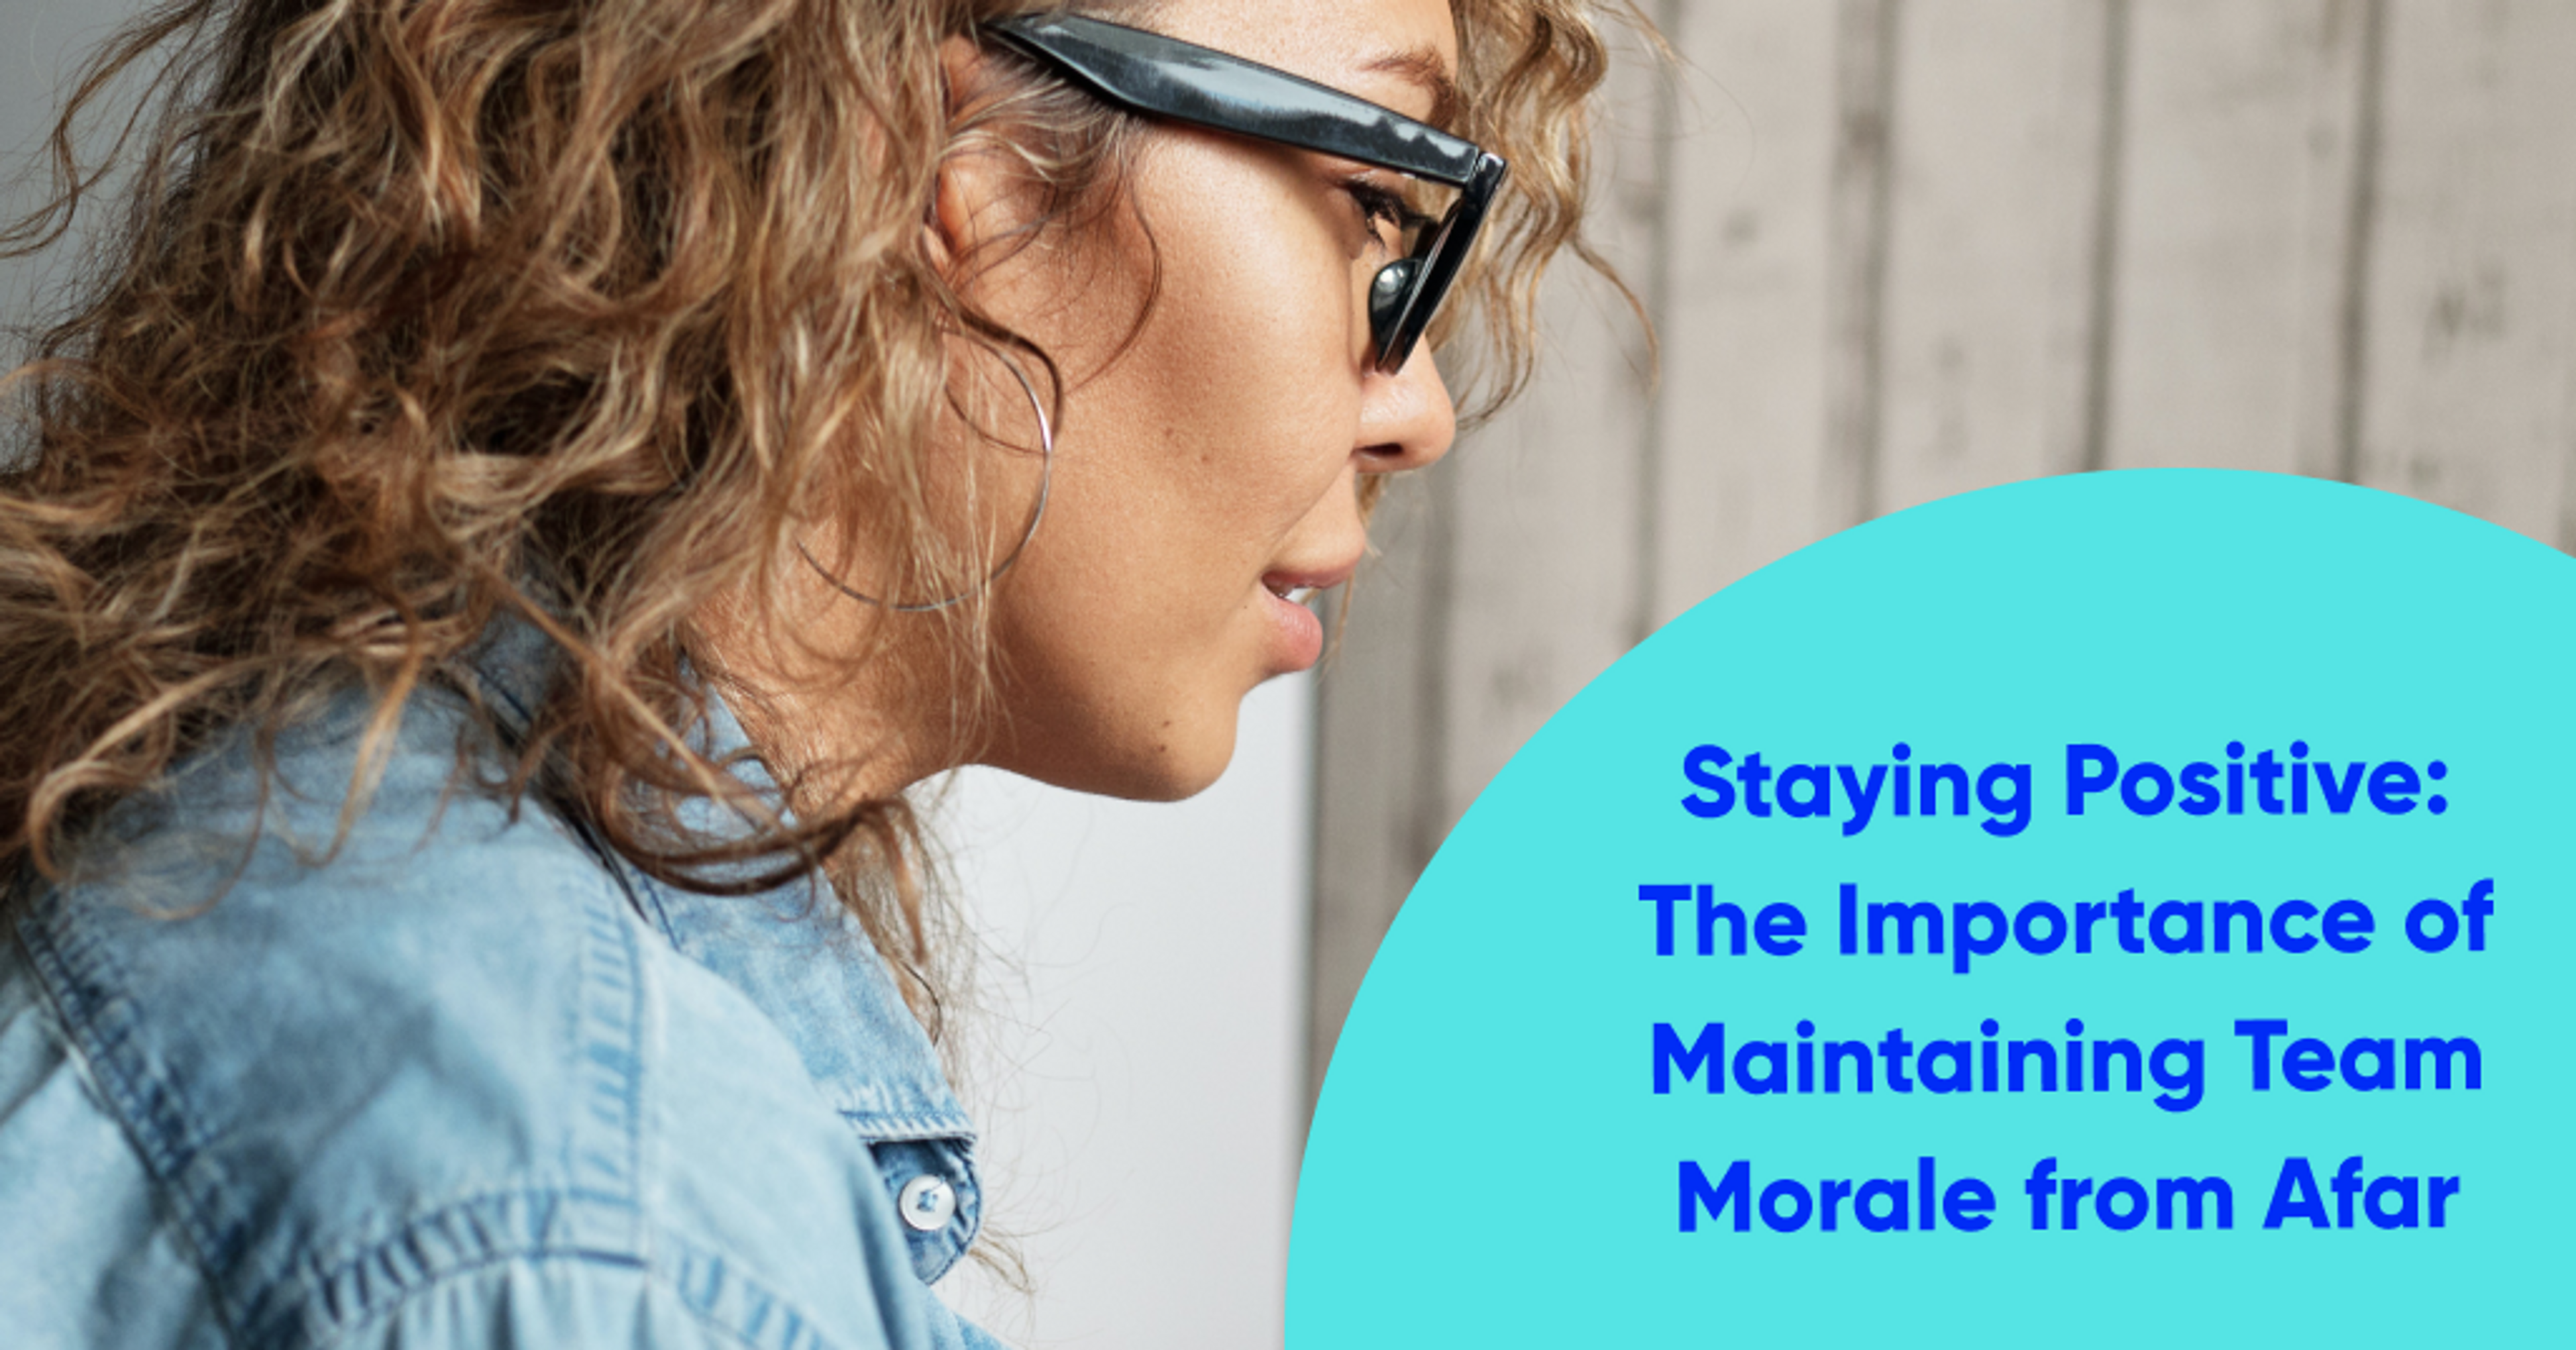 "Staying Positive: The Importance of Maintaining Team Morale from Afar" with a picture of a woman wearing glasses